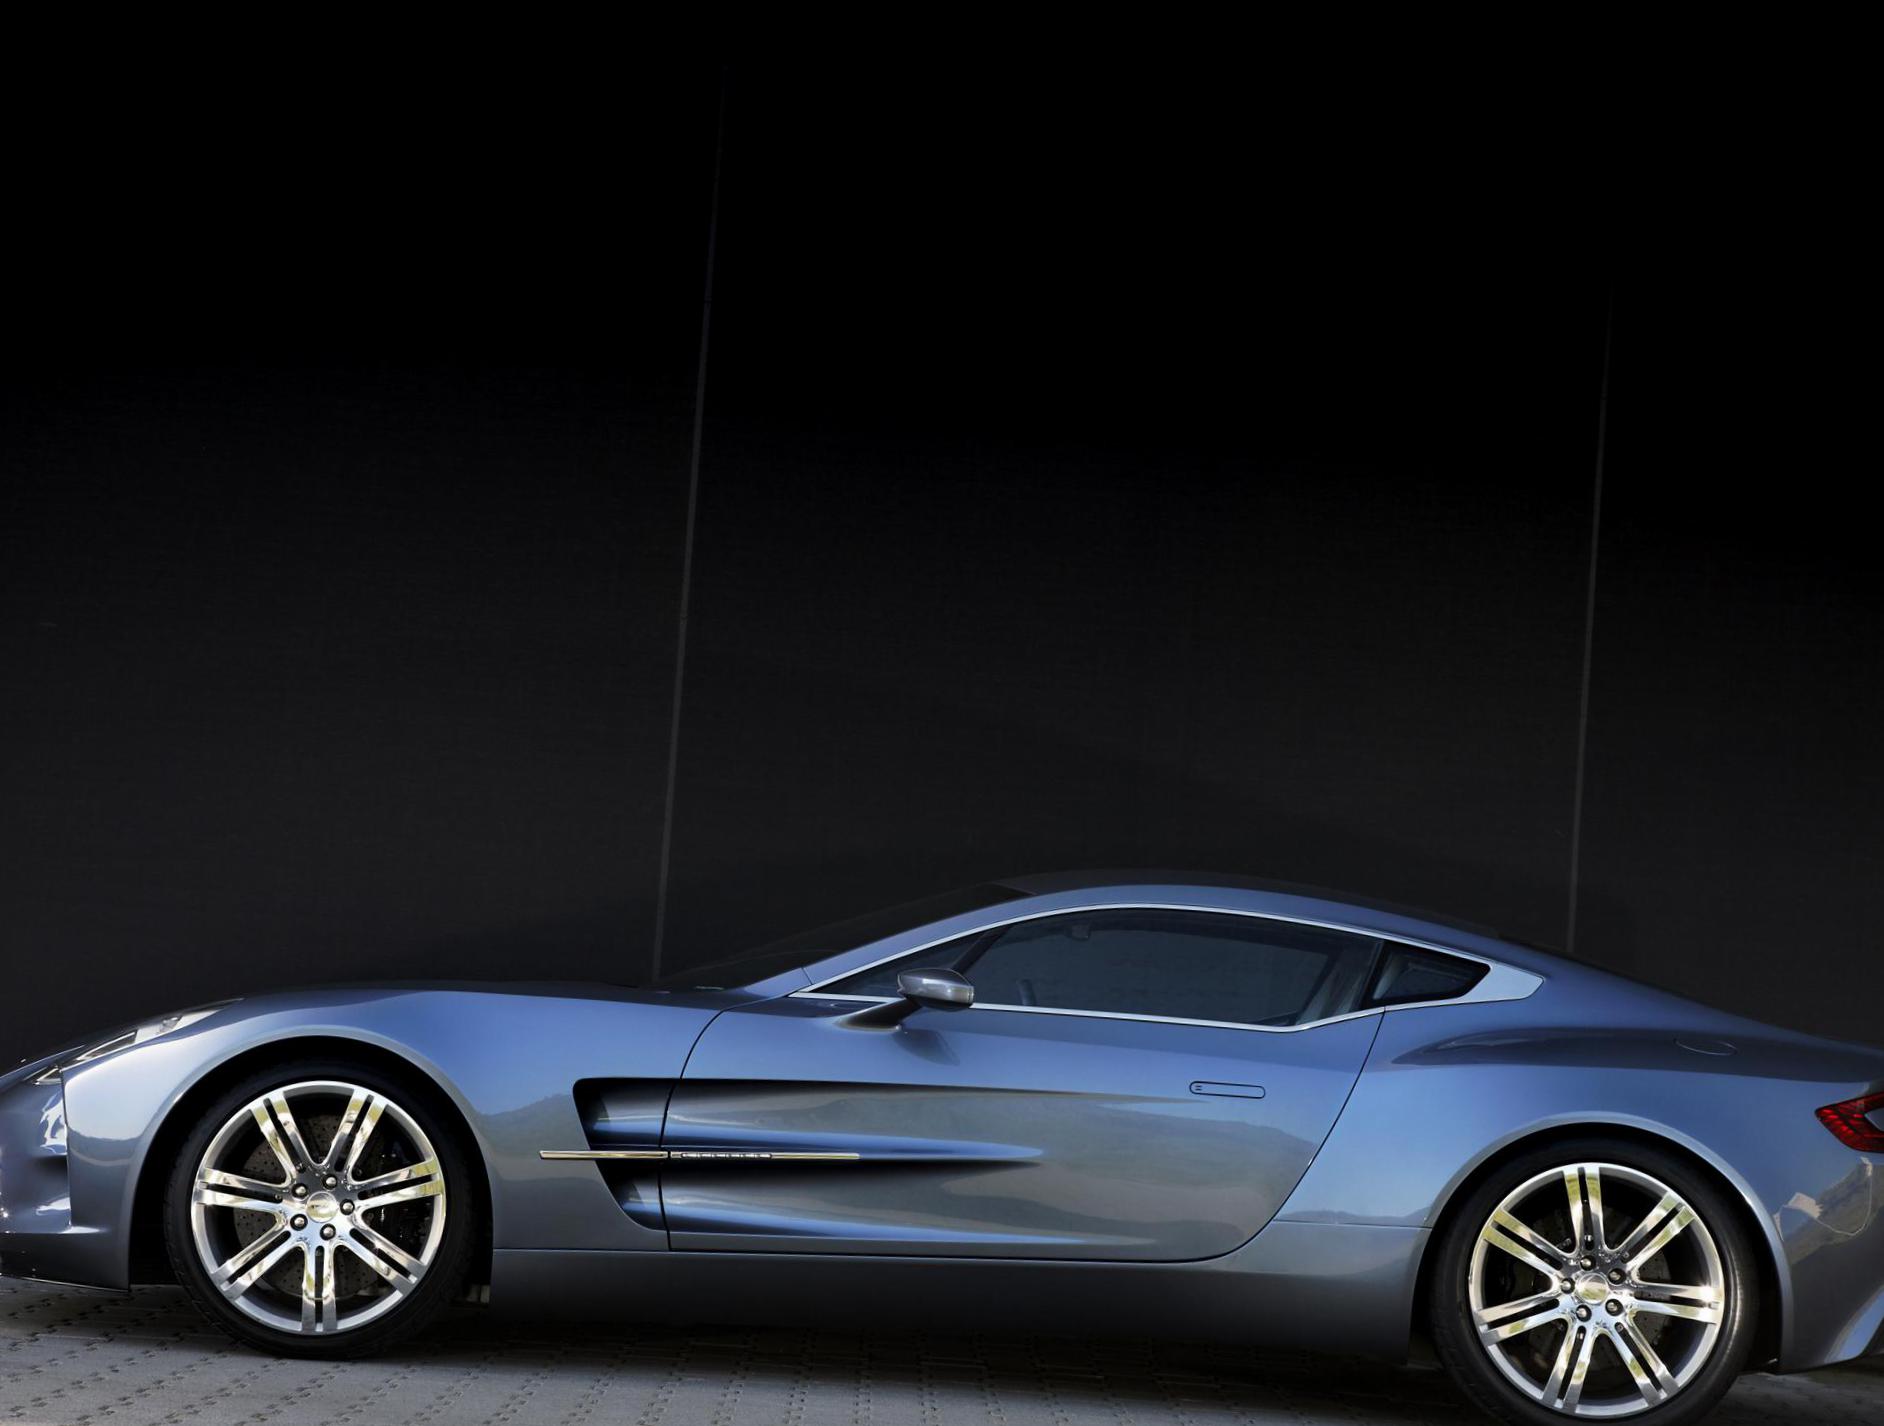 Aston Martin One-77 how mach coupe